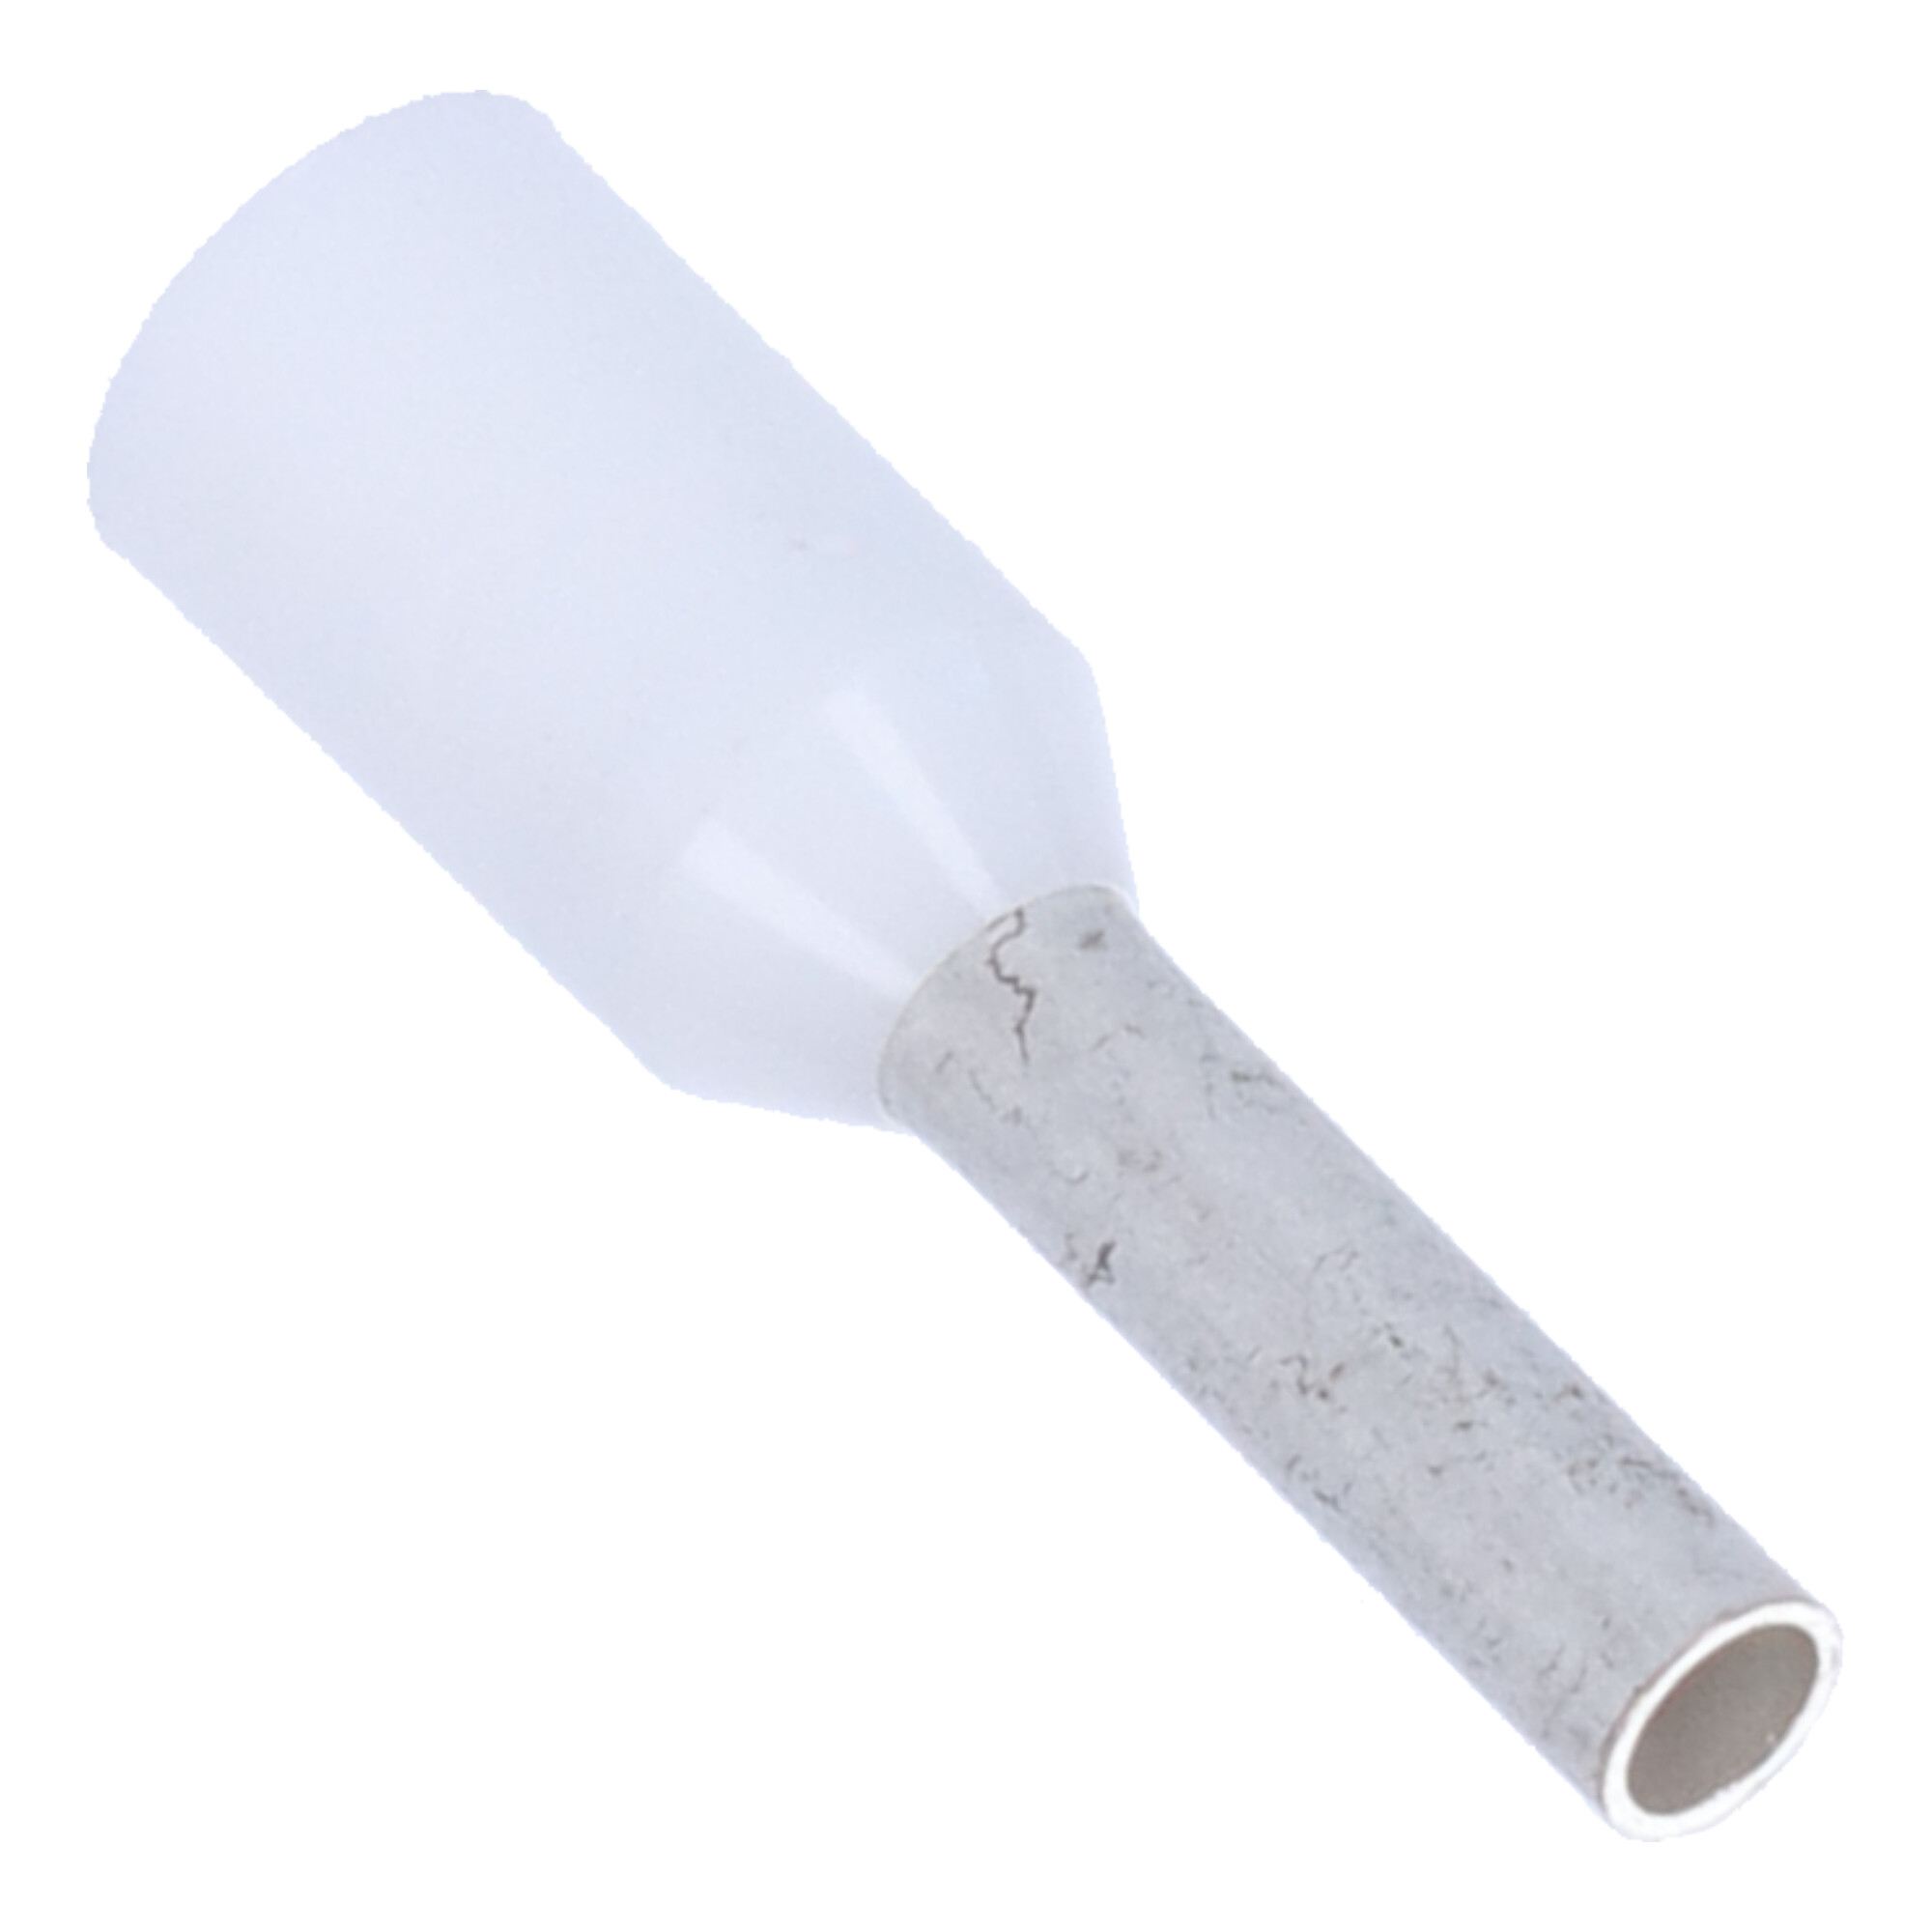 15-00737 Insulated wire end sleeve